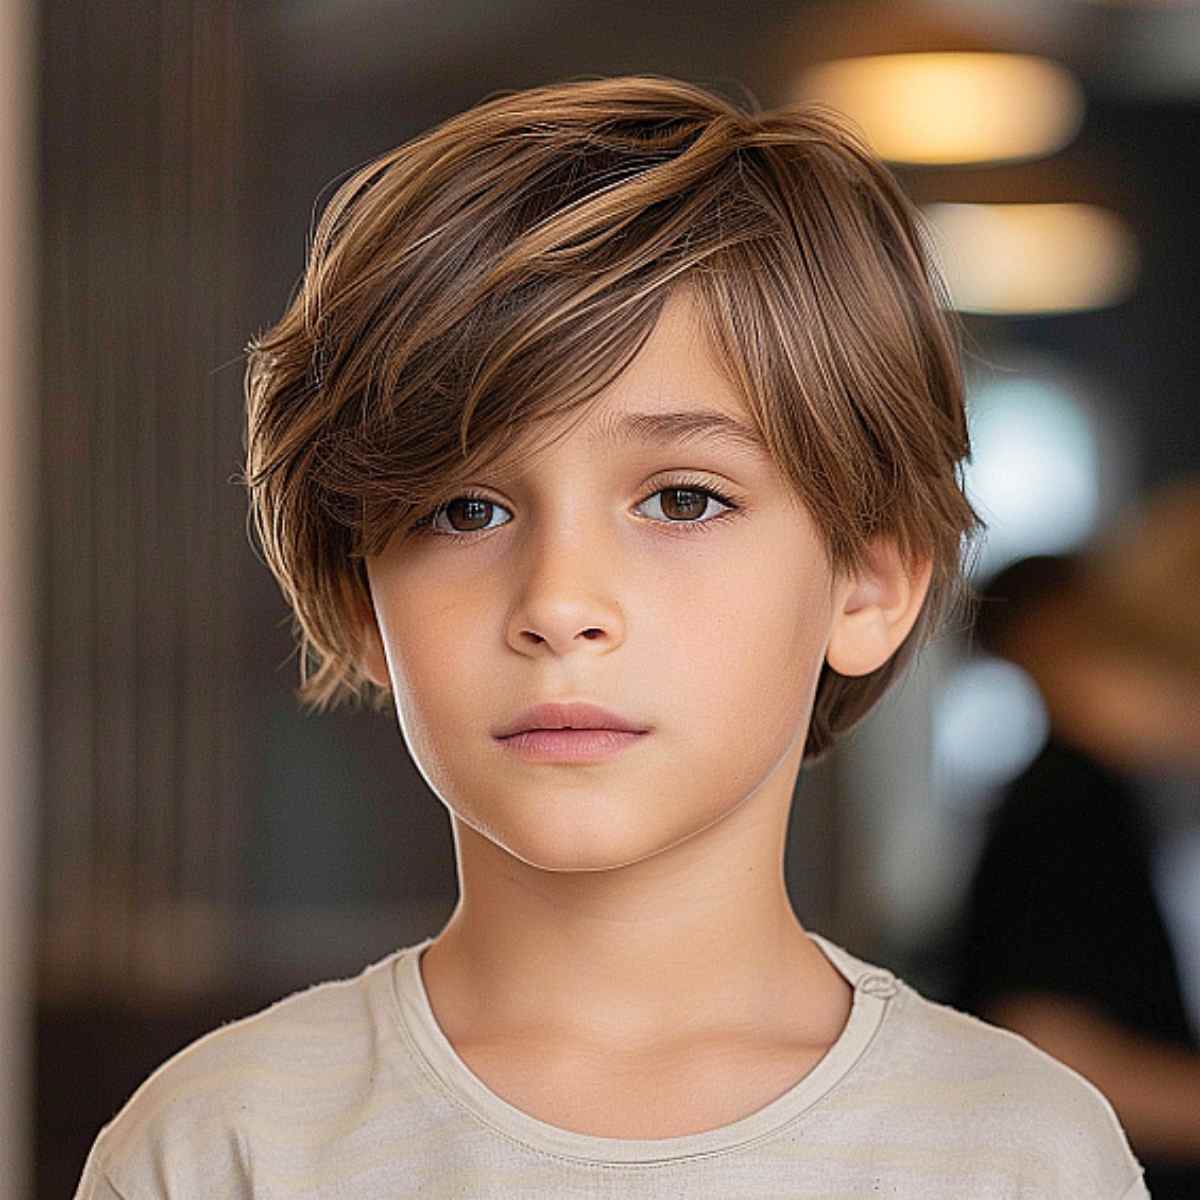 Long side swept hairstyle for boys